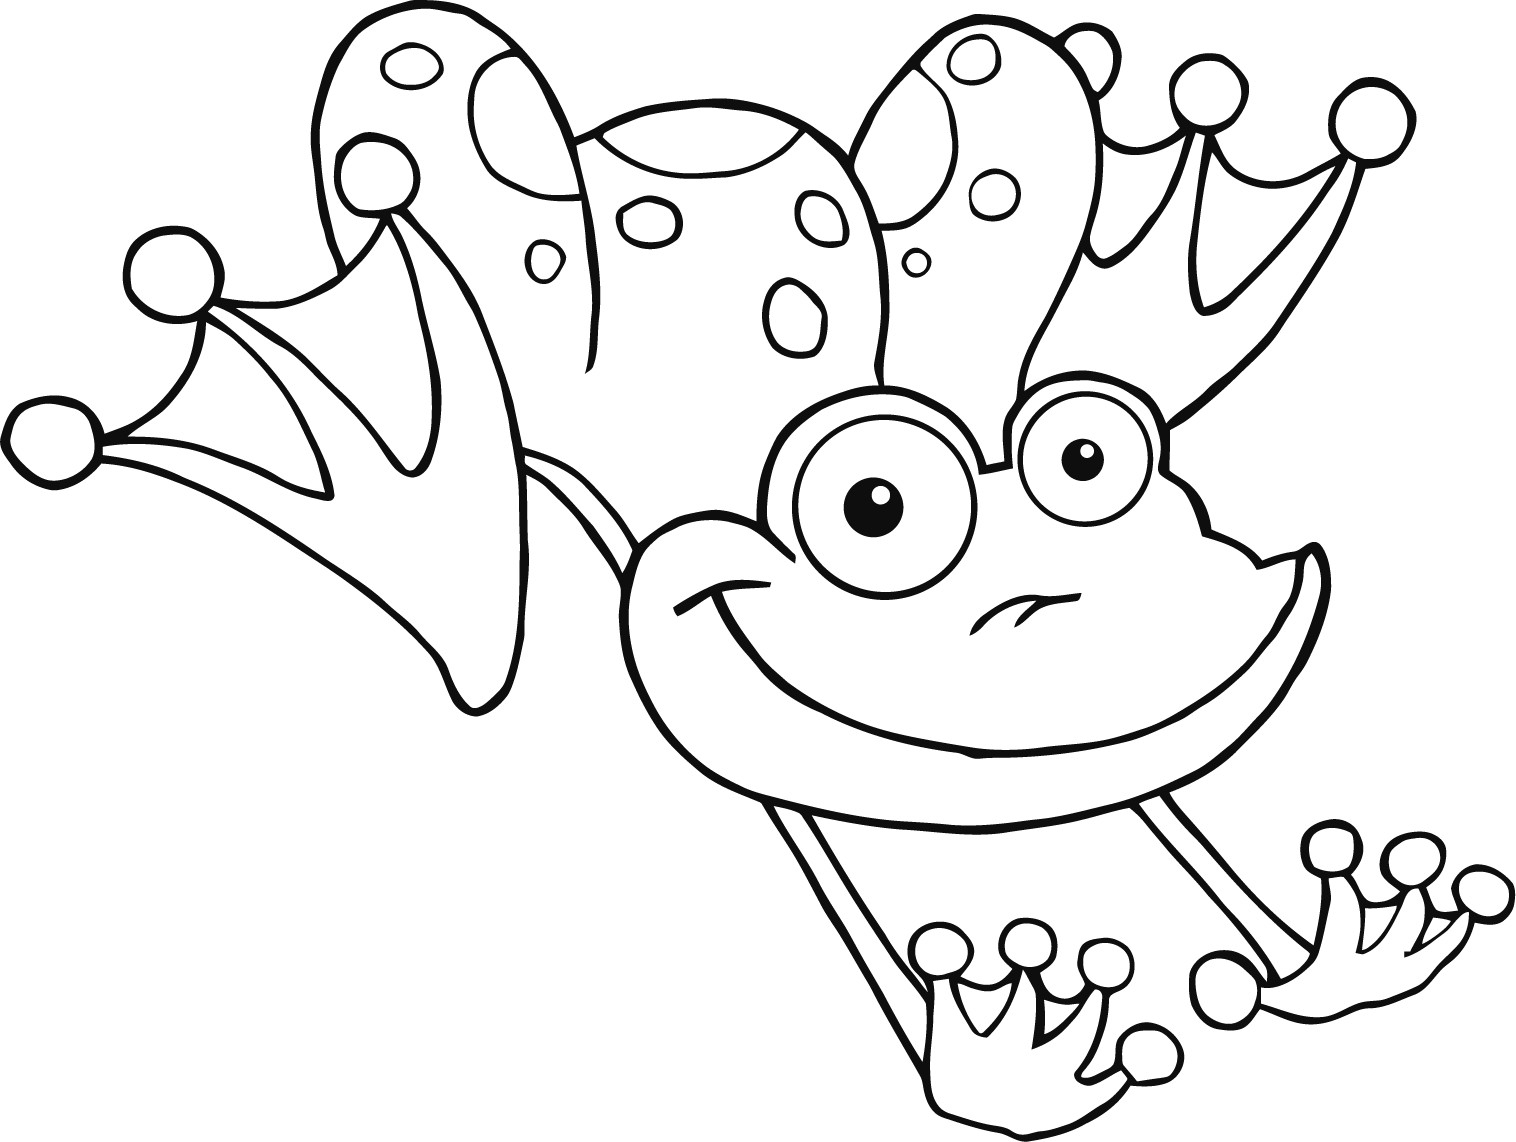 Rainforest Frog Coloring Page Rainforest Frog Coloring Sheets Unique Free Printable Frog Templates